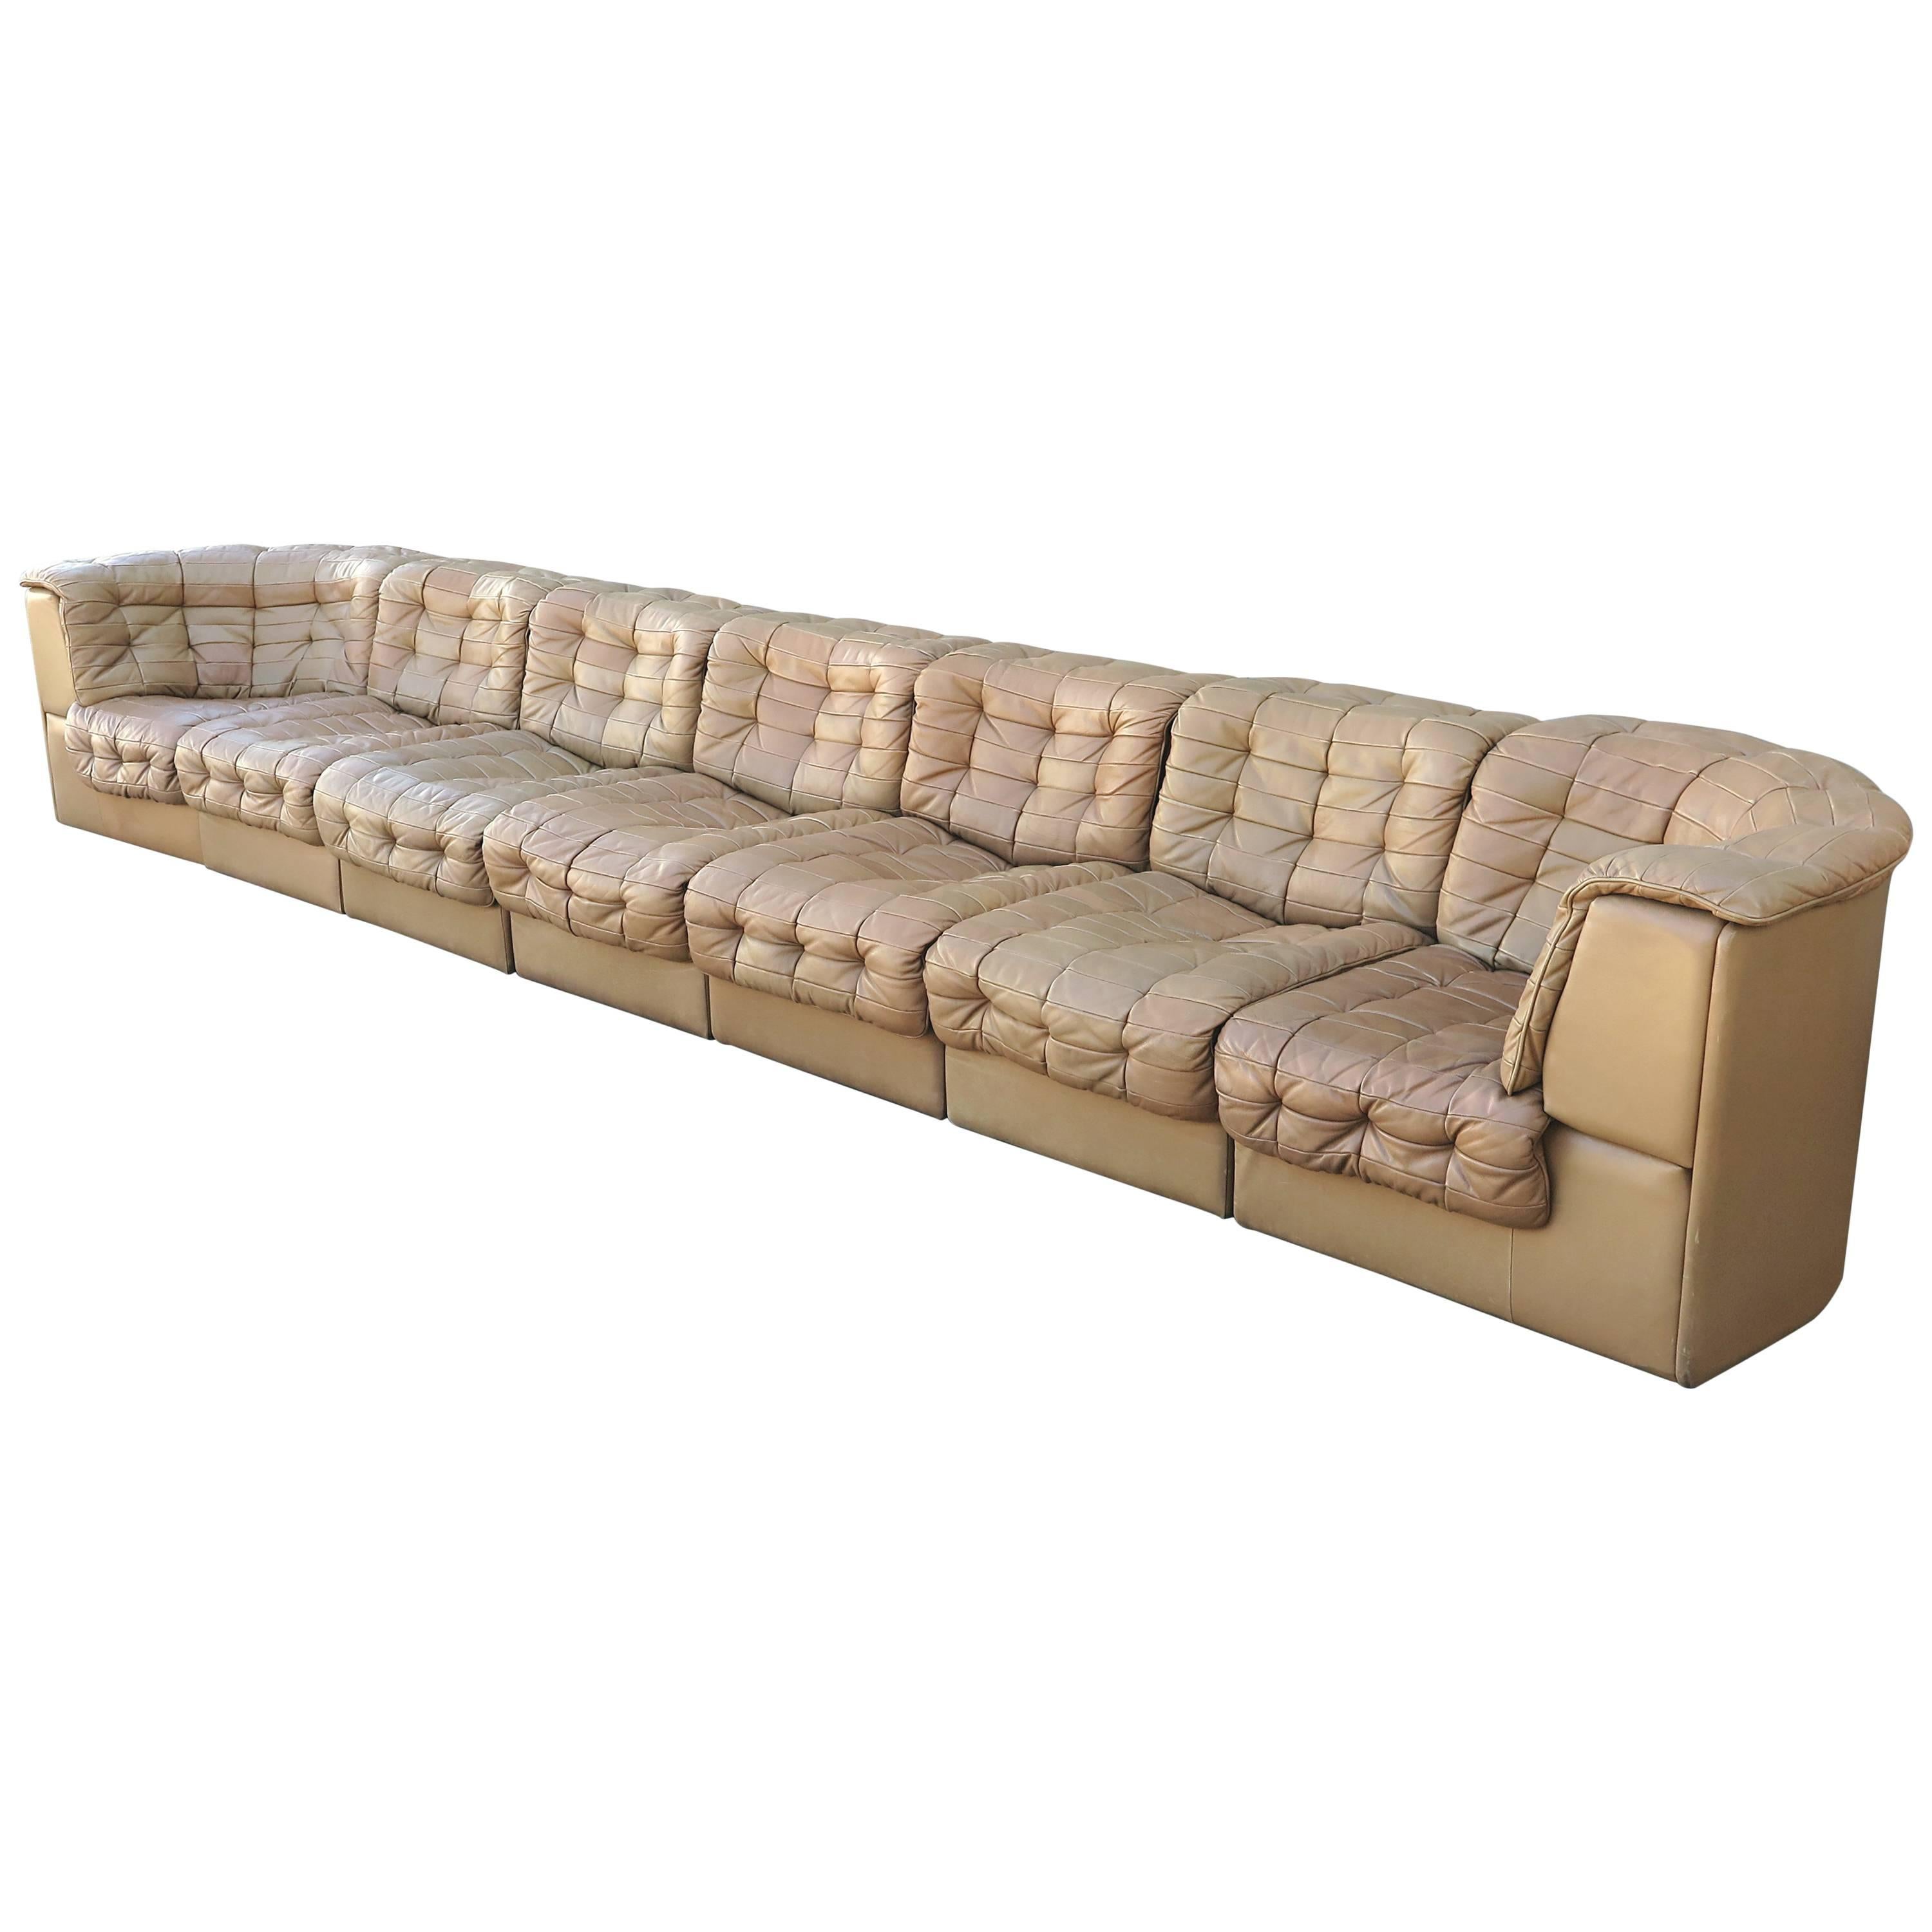 Very comfortable sectional De Sede sofa with seven elements and two ottoman, 
soft lightbrown Leather in very good condition, Switzerland circa 1970.